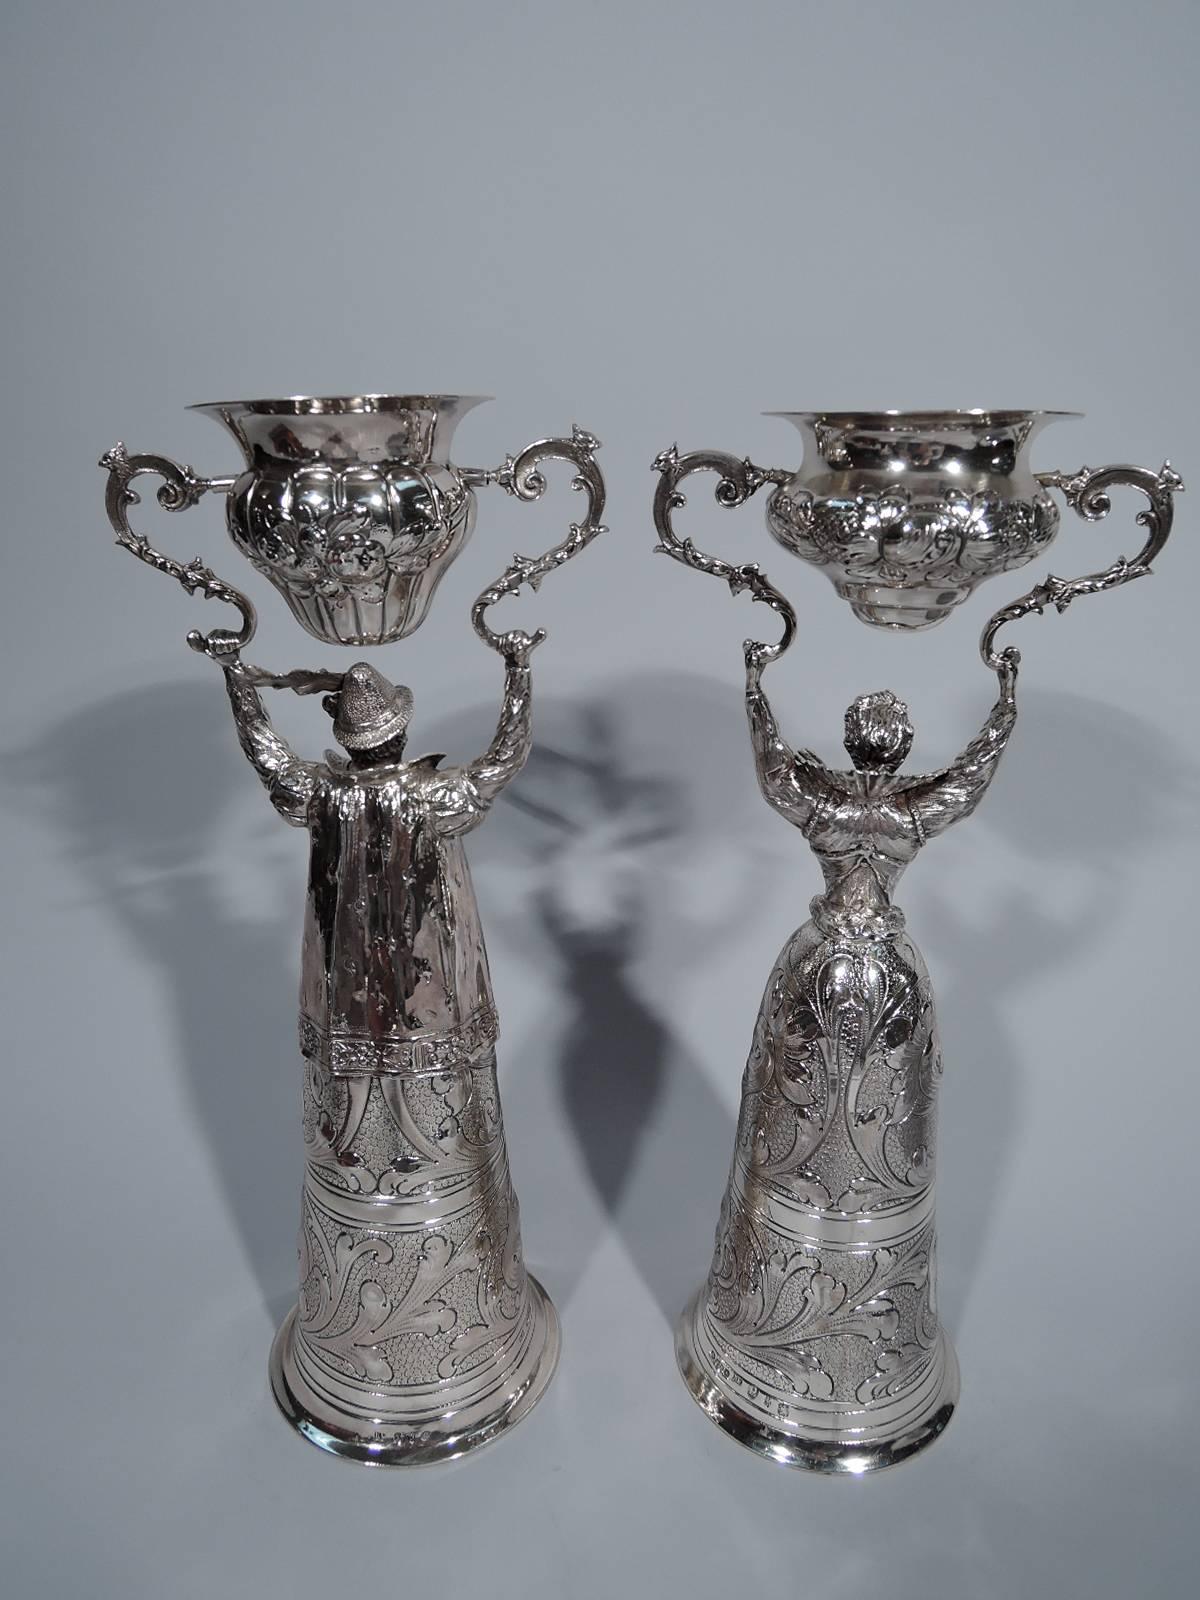 A wonderful pair of German sterling silver marriage (or wager) cups. This pair comprises a man and woman in Renaissance attire, each holding overhead two scrolled brackets with swing cup. Fantastic details including lace ruff and embroidered bodice